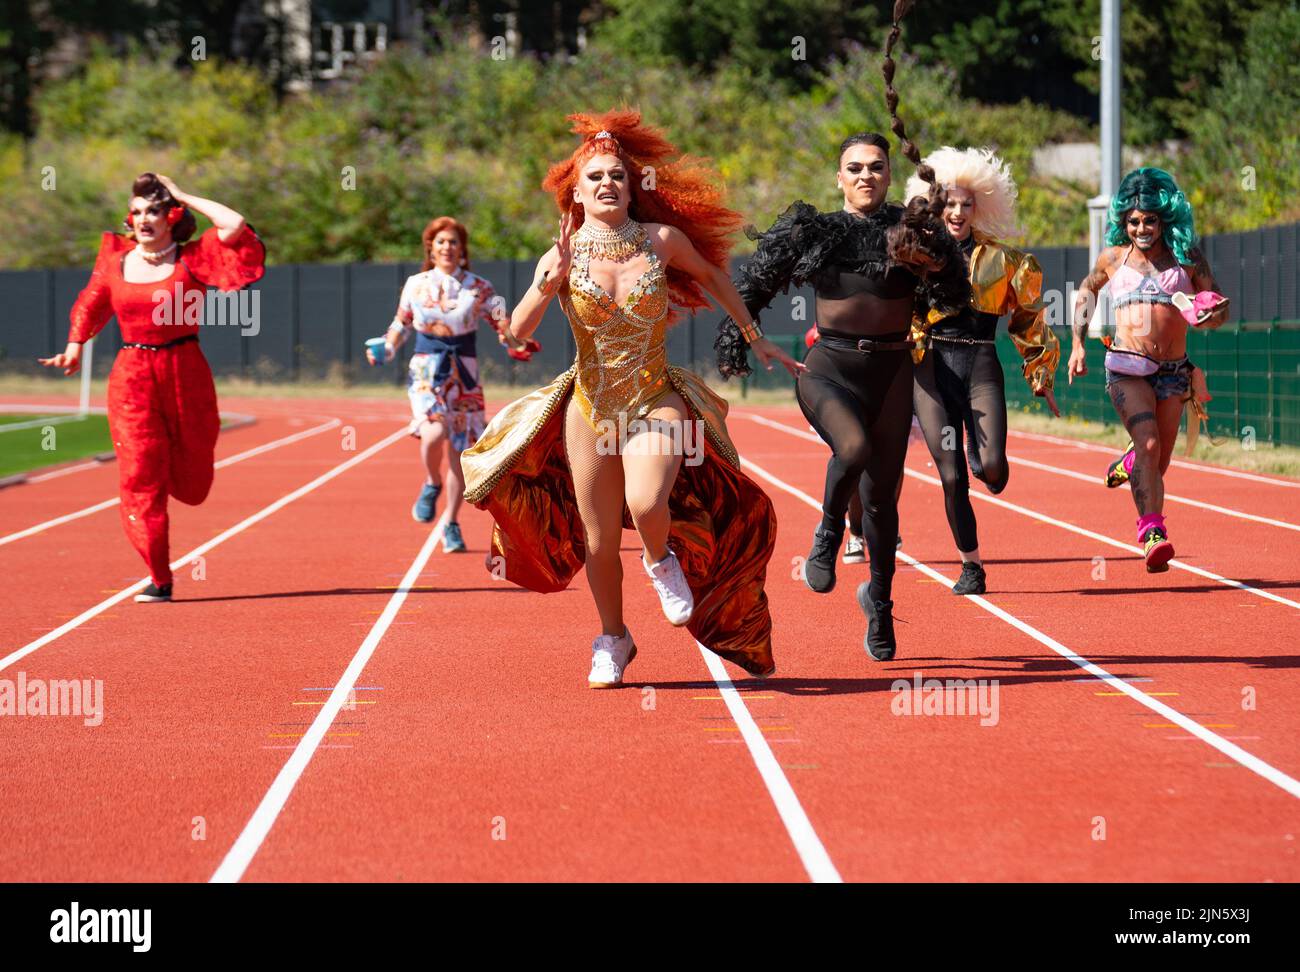 Edinburgh, Scotland, UK. 9th August 2022.  Drag queens from several shows performing as part of the Edinburgh Fringe 2022 Toake part in a Drag Race on the running track at the redeveloped Meadowbank stadium in Edinburgh today. From the left; Kate Butch, Dixie Longate, Belle Du Ball, Nastia, Enter Serenity, Captain Kidd.  Iain Masterton/Alamy Live News Stock Photo